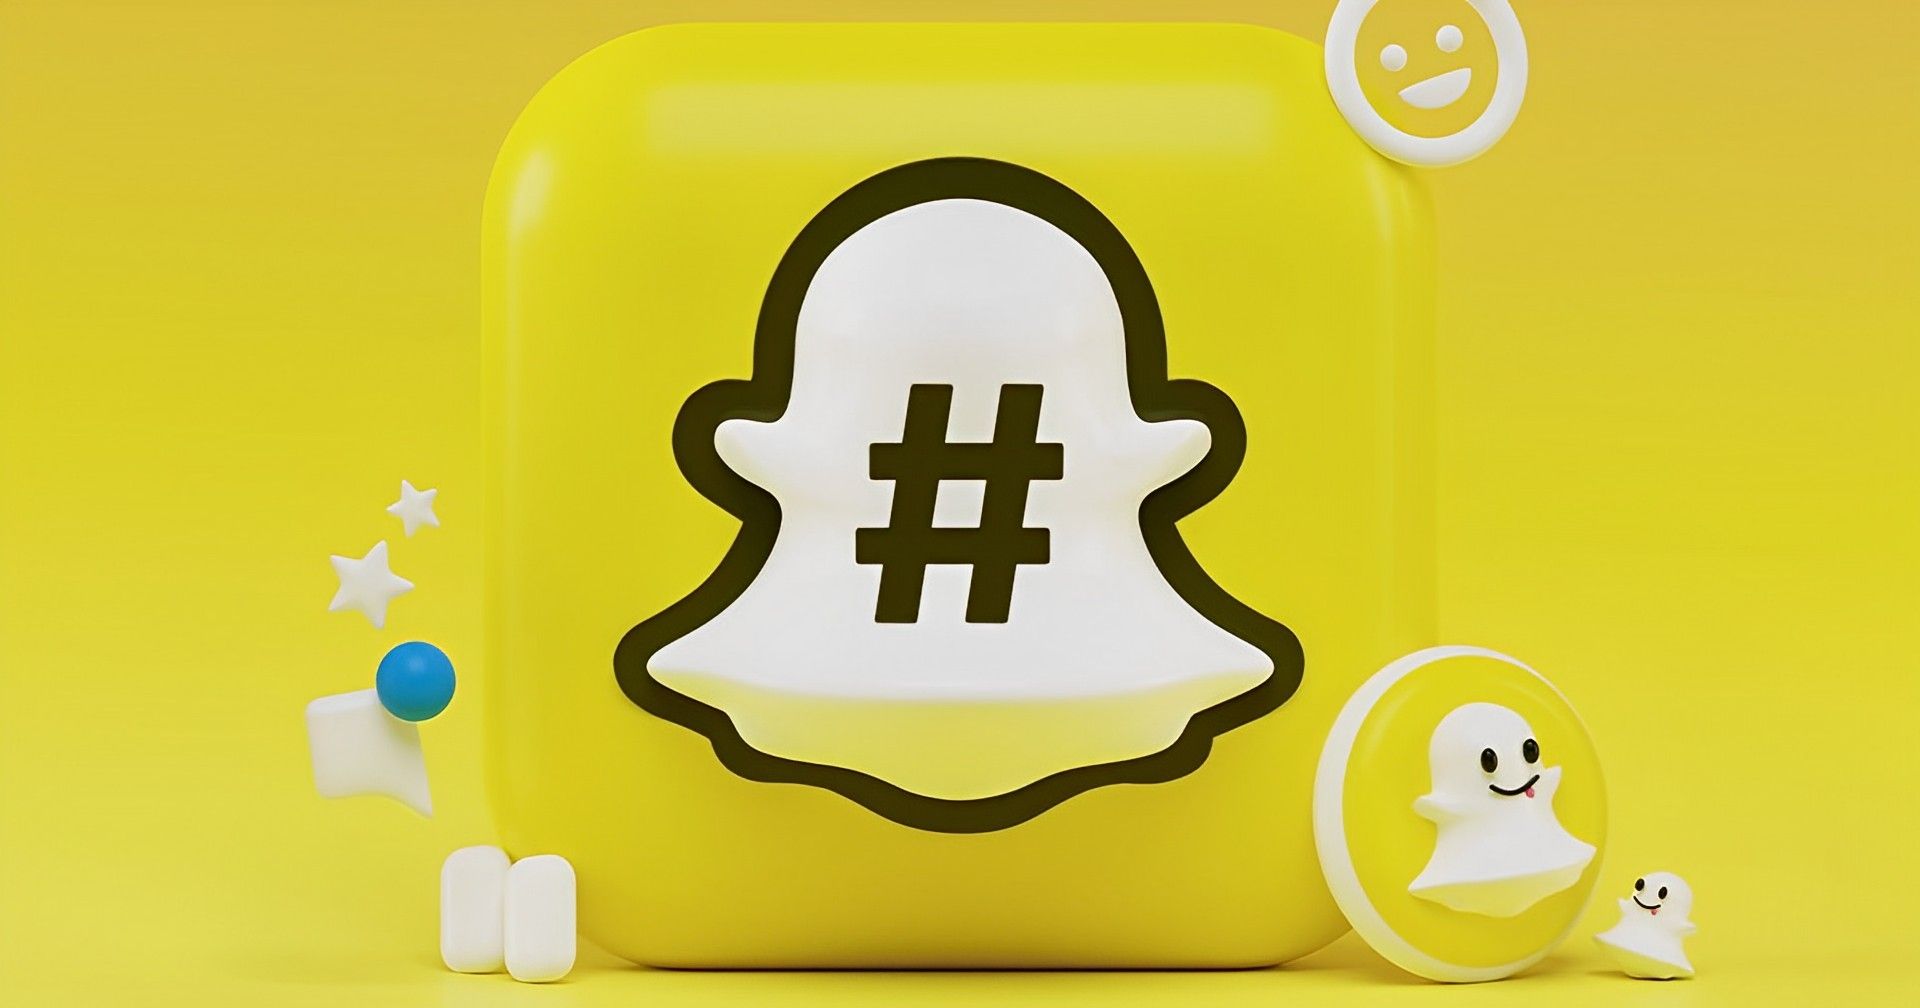 What does 13 mean on Snapchat? How to keep tack of trends?